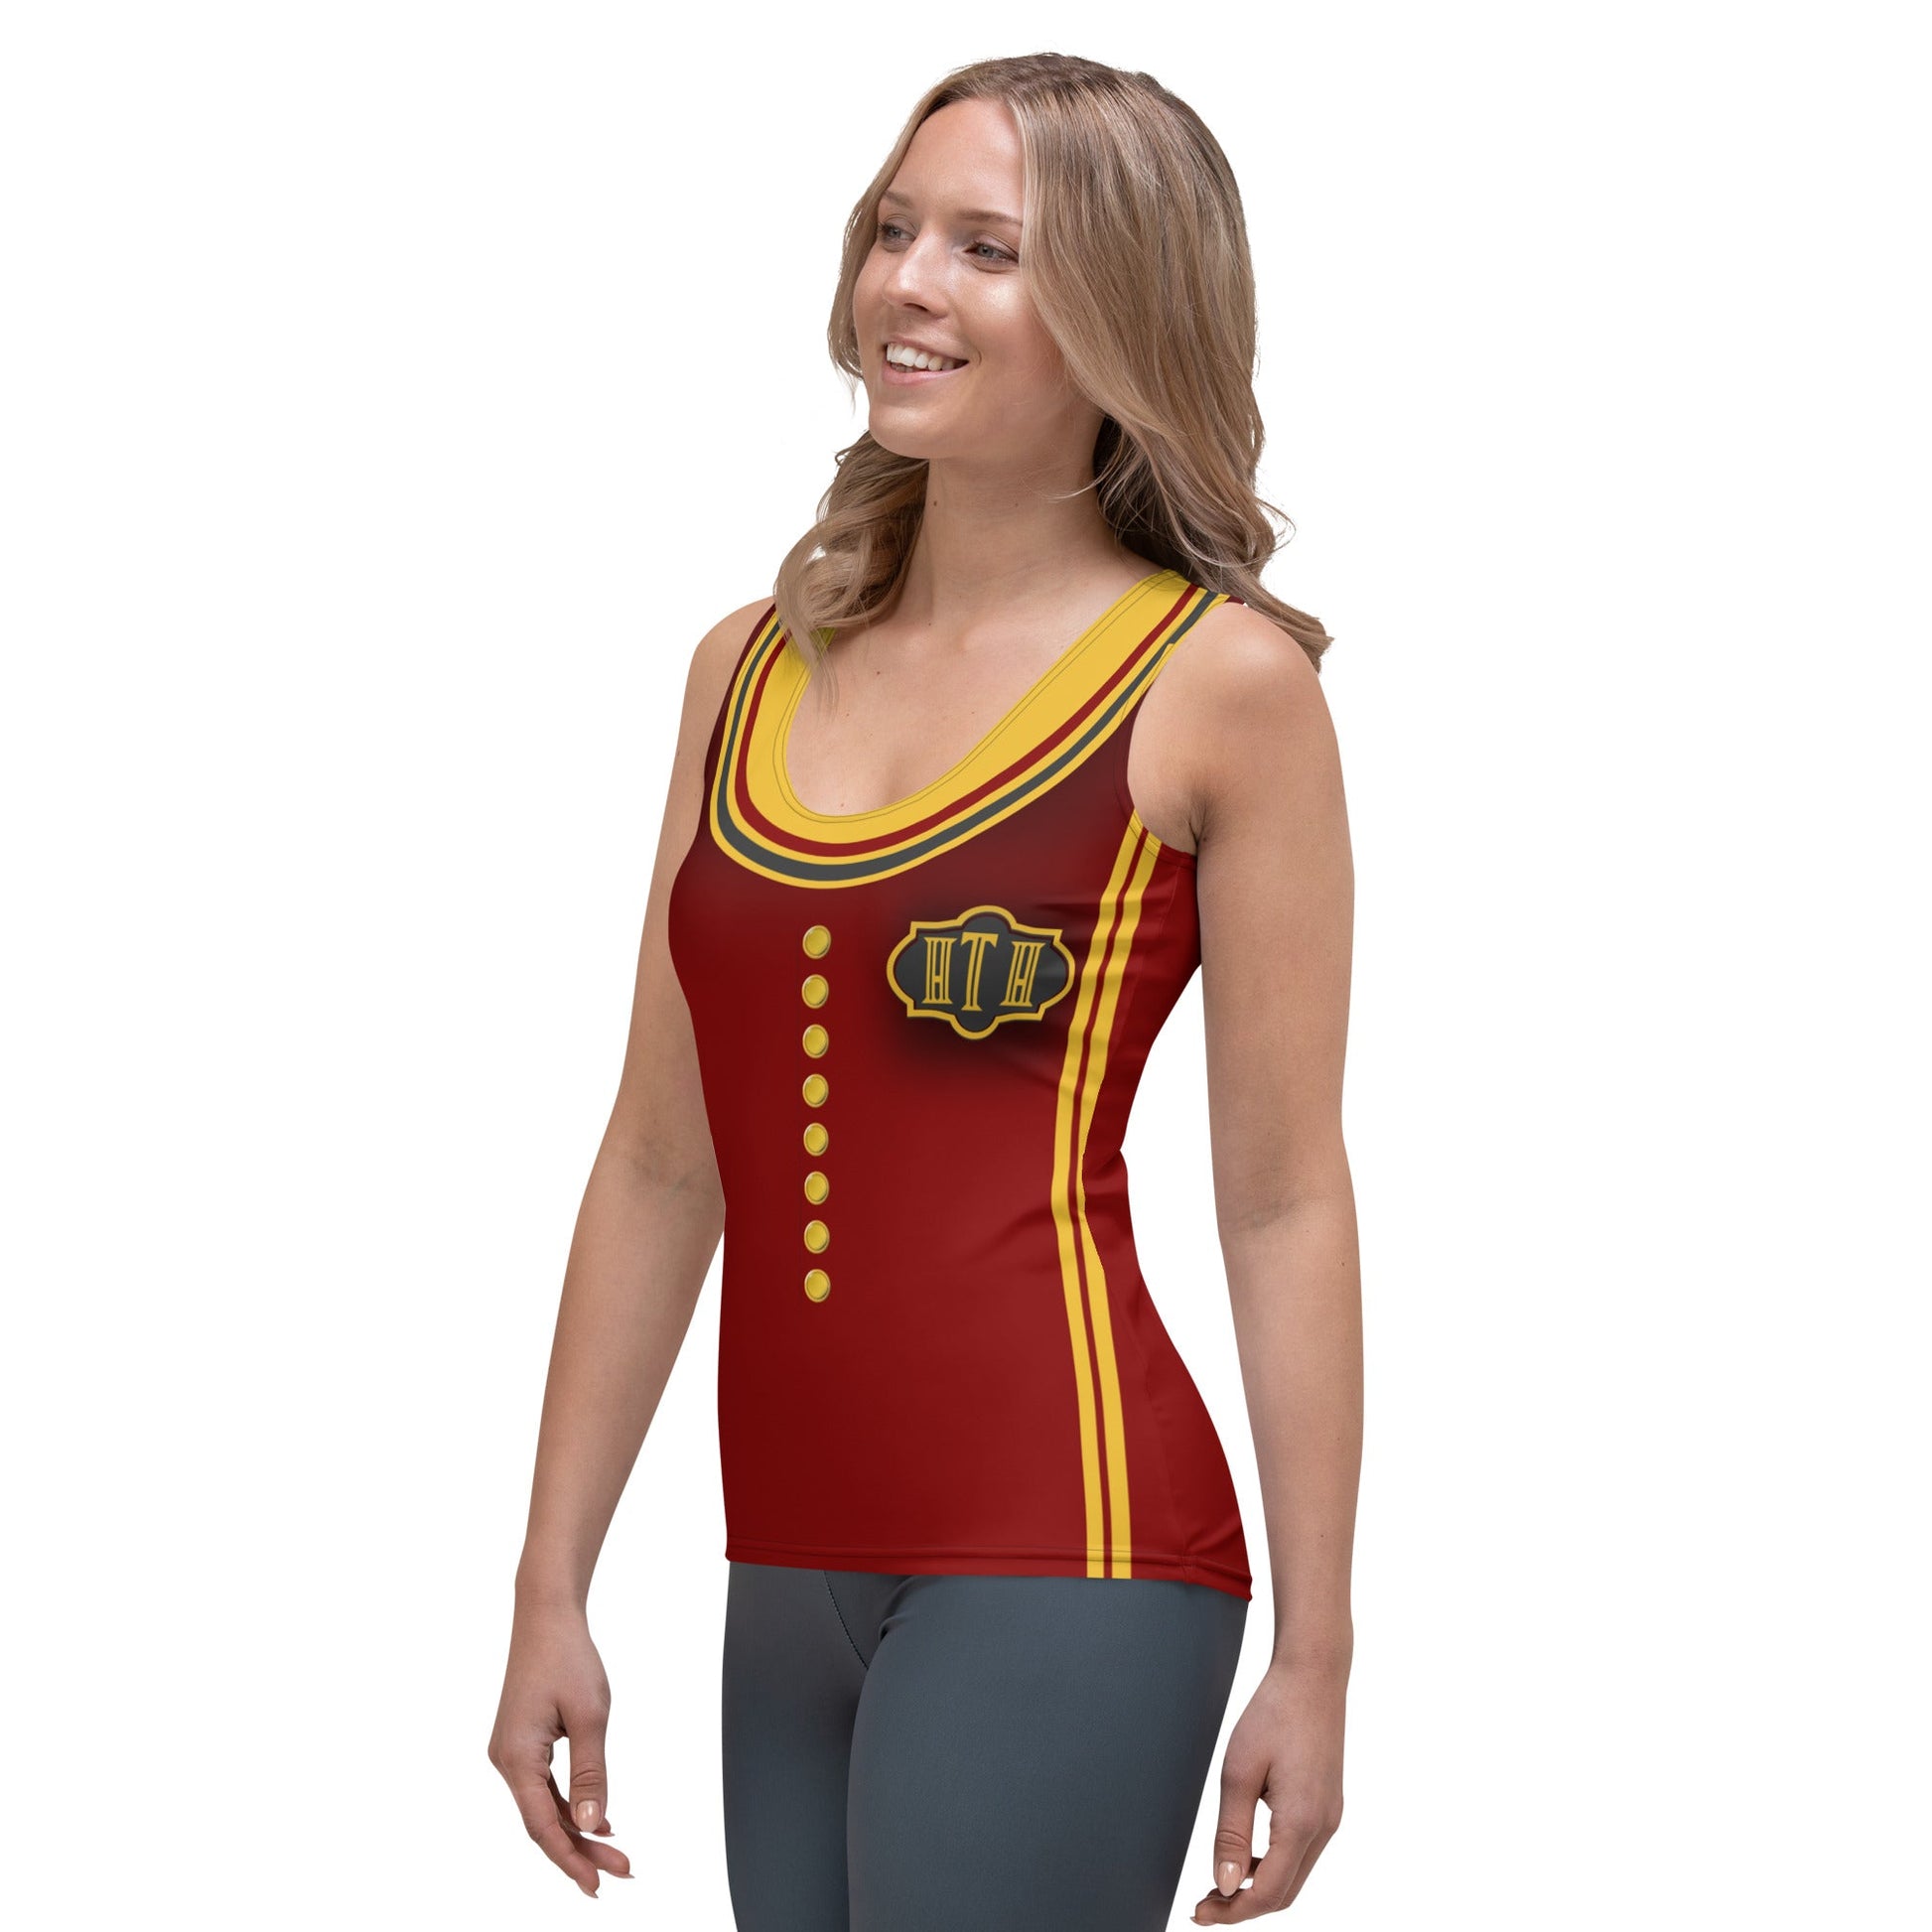 The TOT Tank Top cast membercast member costumeAdult T-ShirtLittle Lady Shay Boutique